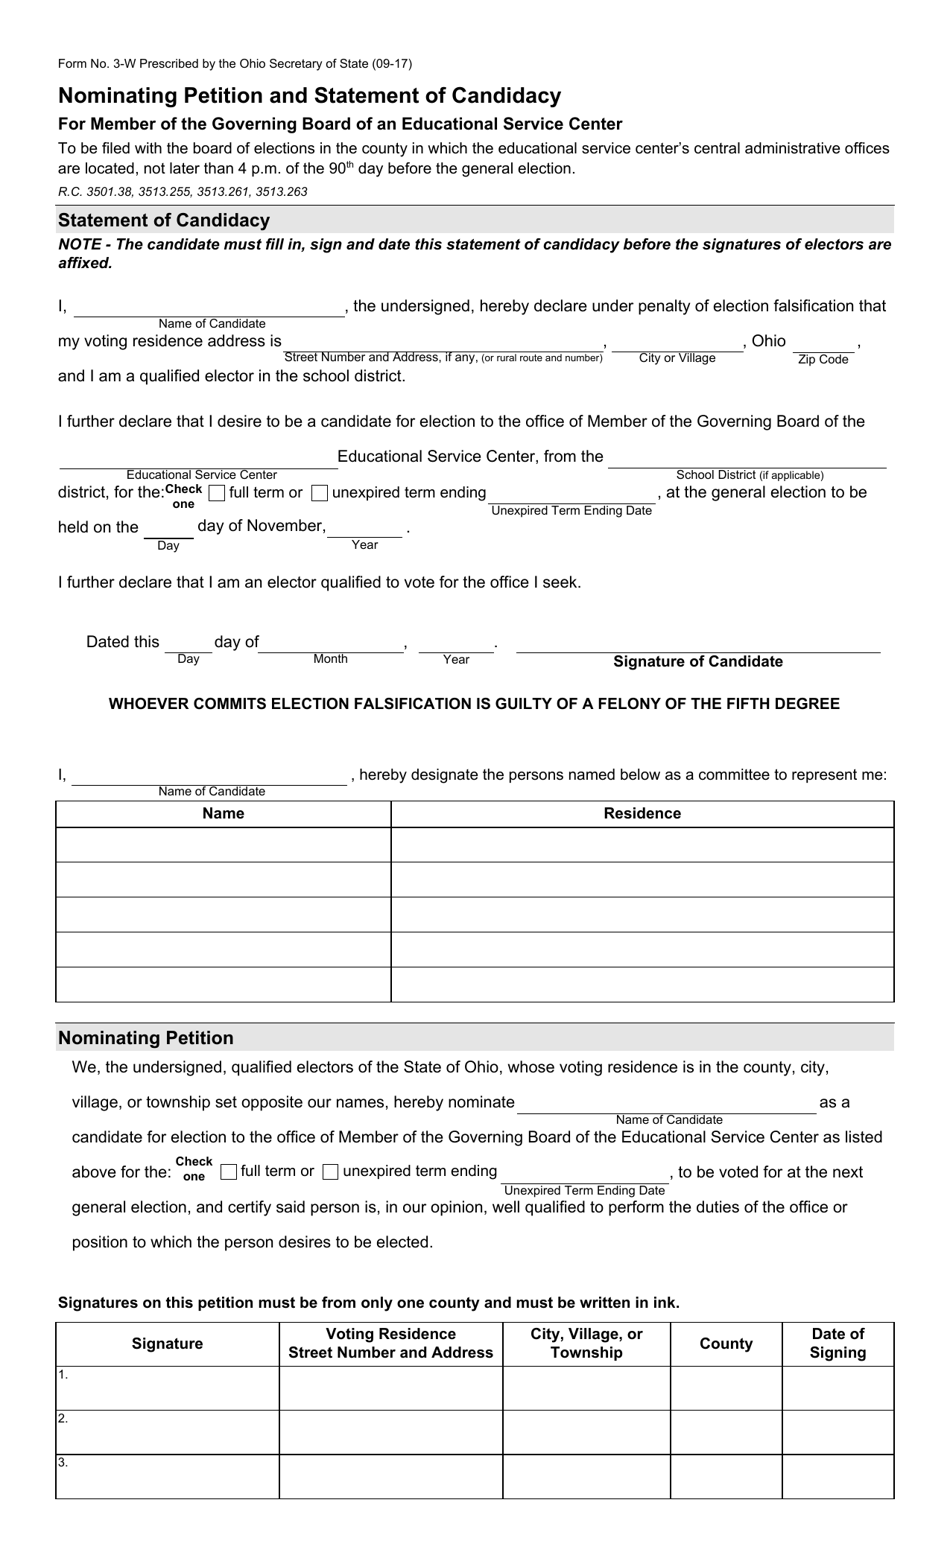 Form 3-W Nominating Petition and Statement of Candidacy for Member of the Governing Board of an Educational Service Center - Ohio, Page 1